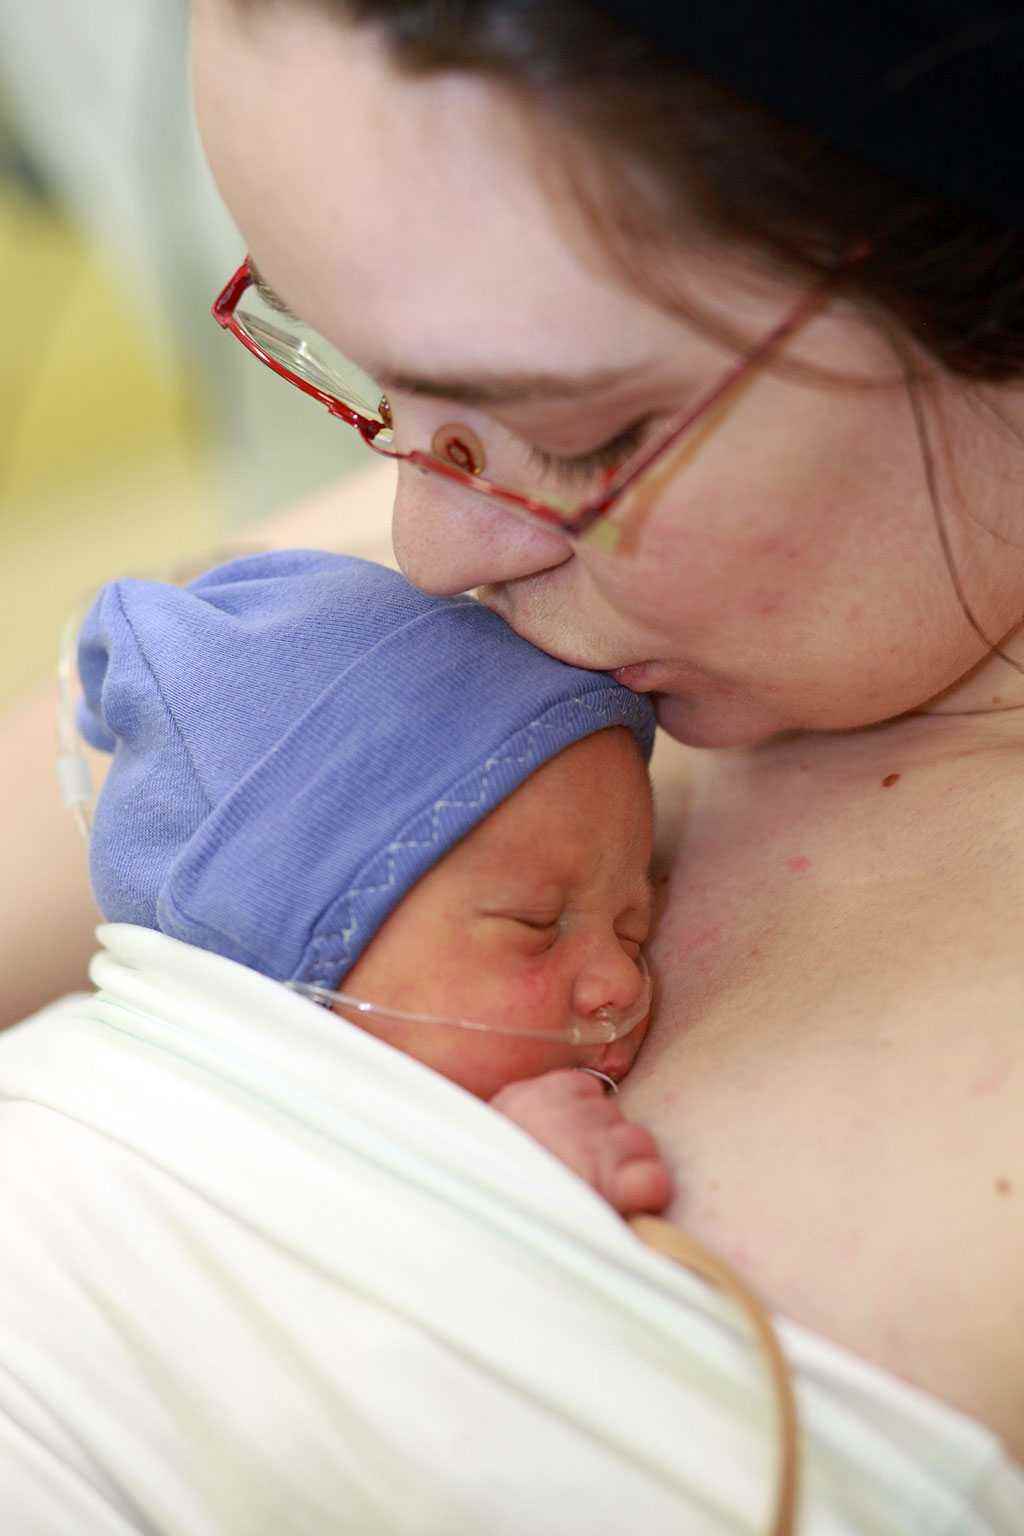 Nirvana’s baby was born prematurely but this UNICEF-supported hospital in Zagreb, Croatia helped protect her from danger